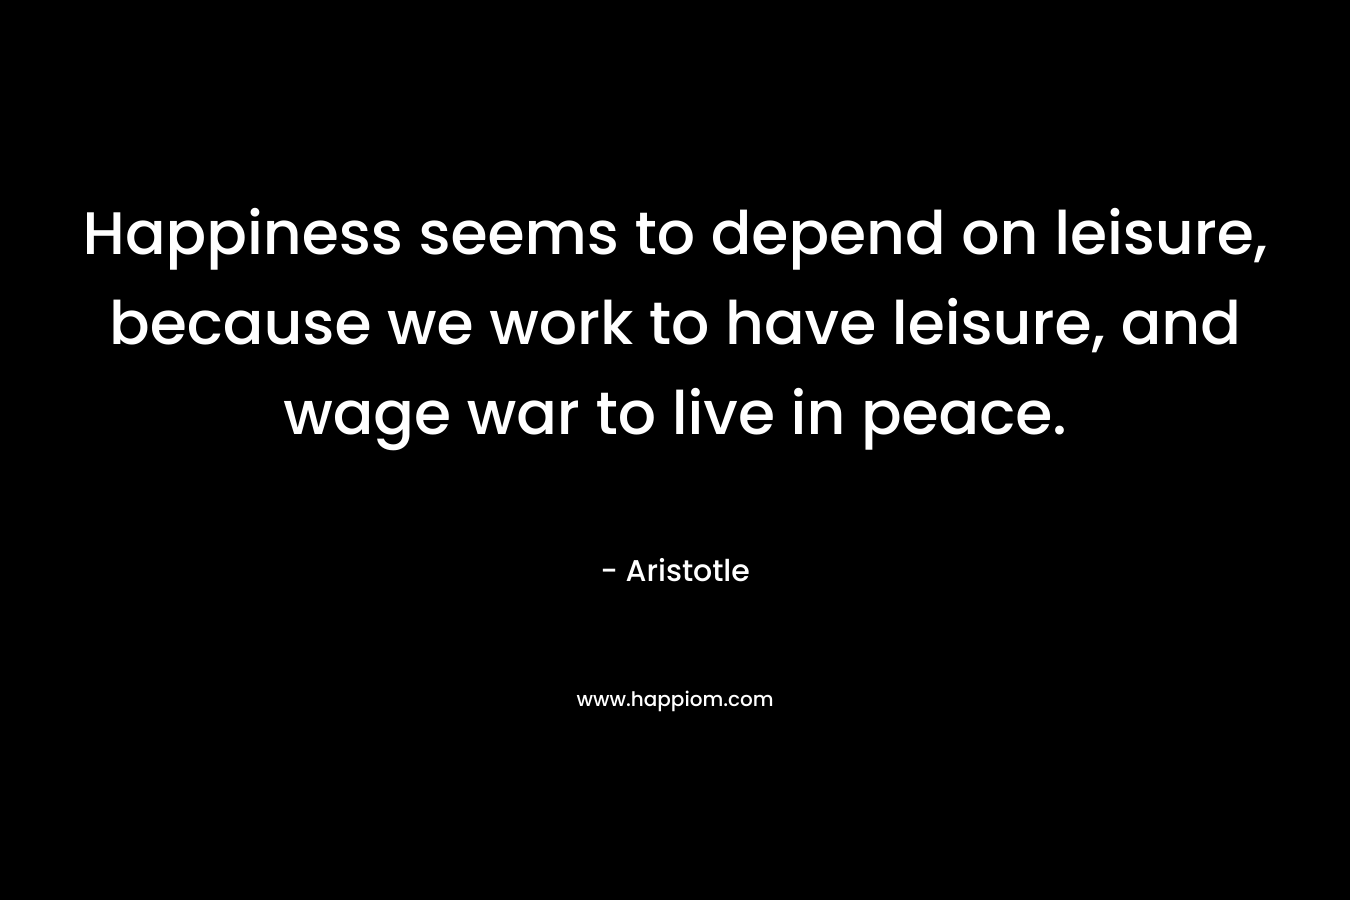 Happiness seems to depend on leisure, because we work to have leisure, and wage war to live in peace. – Aristotle